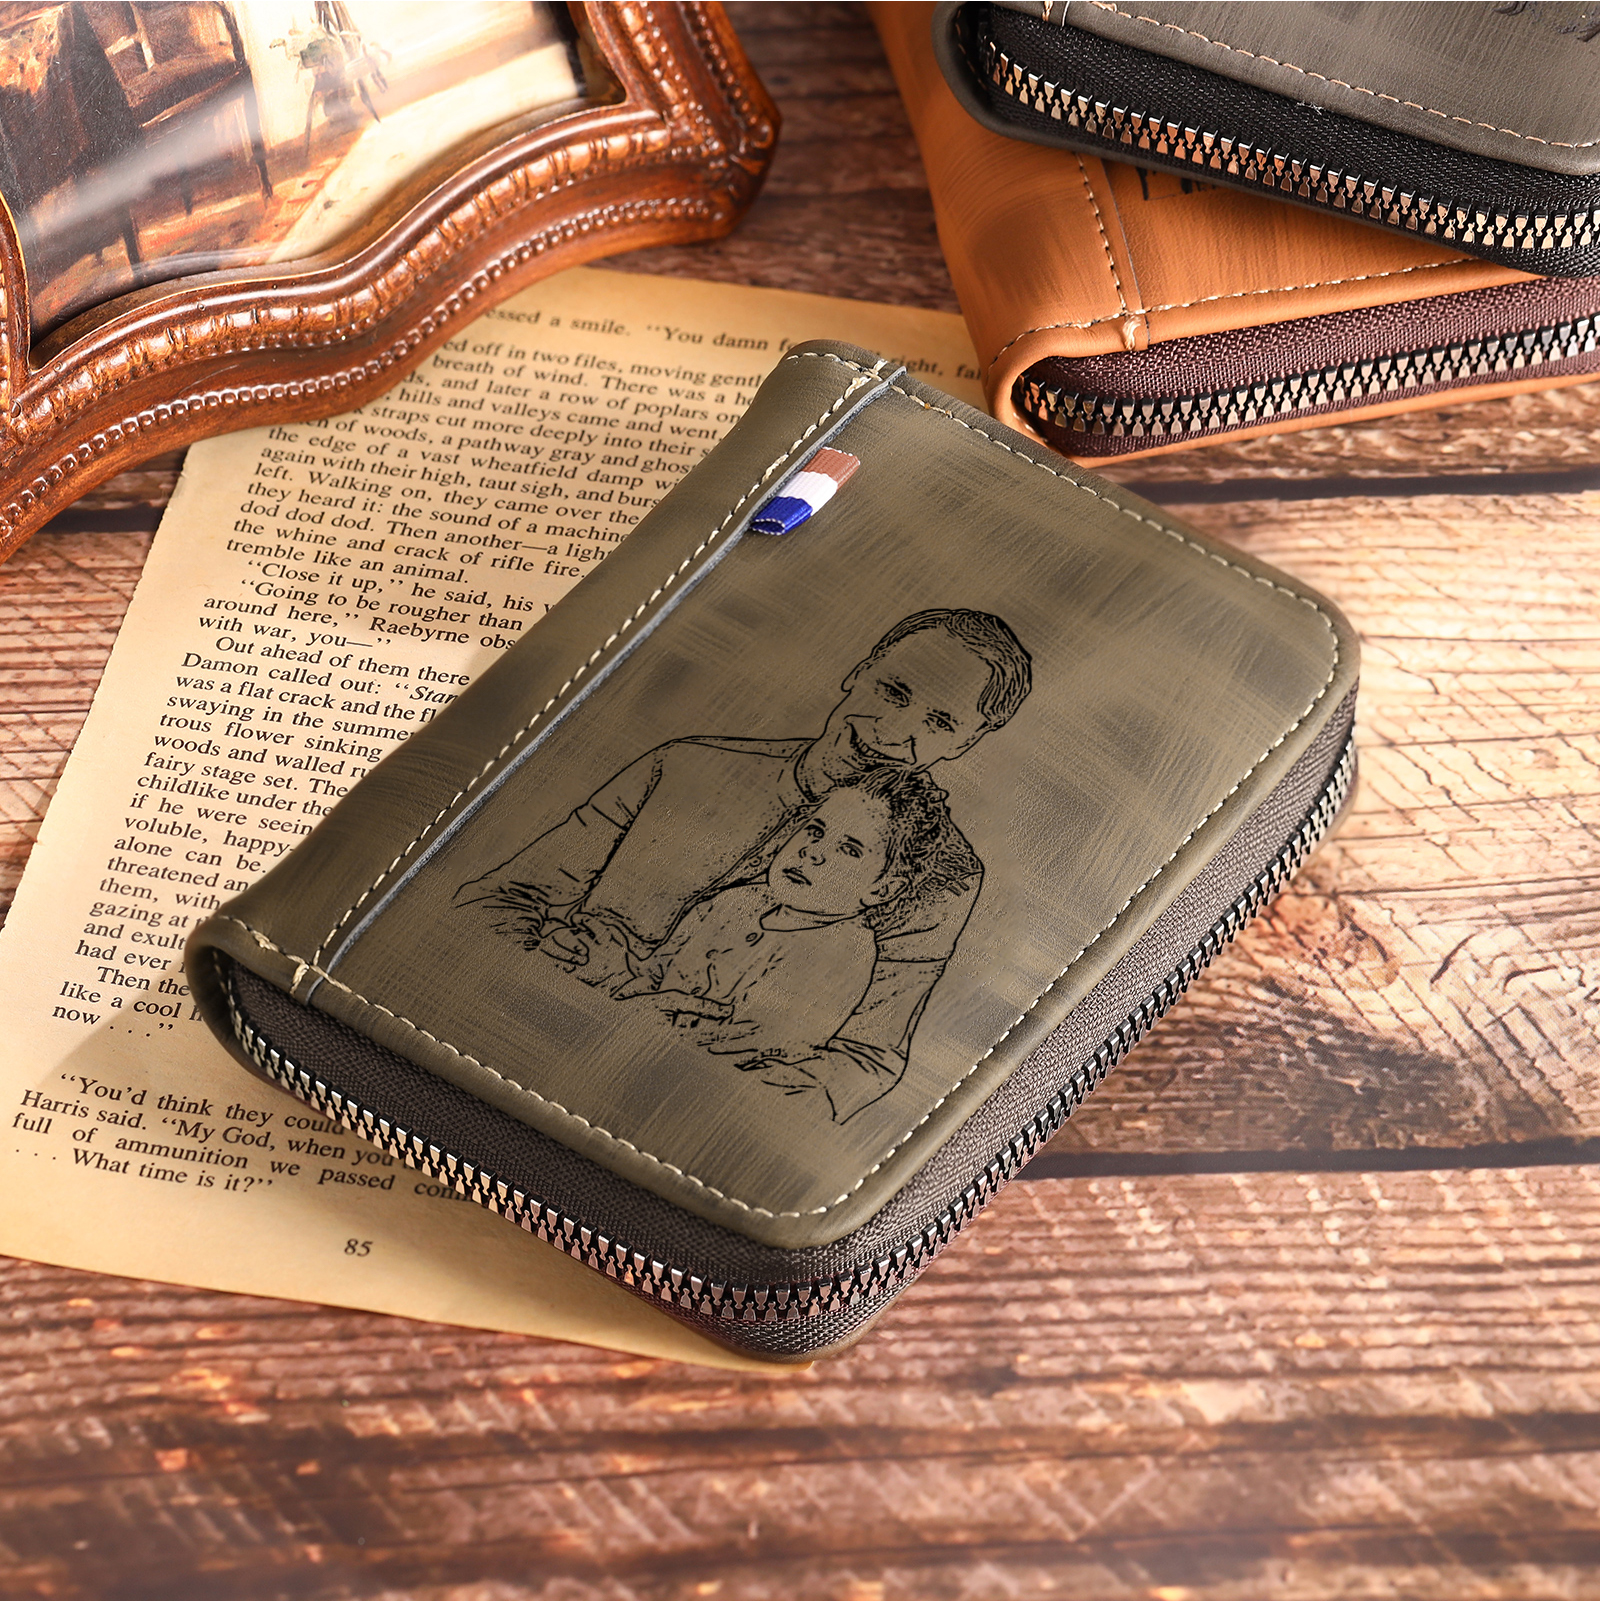 4 Names - Personalized Photo Text Custom Leather Men's Wallet Custom Name Zipper Wallet for Dad